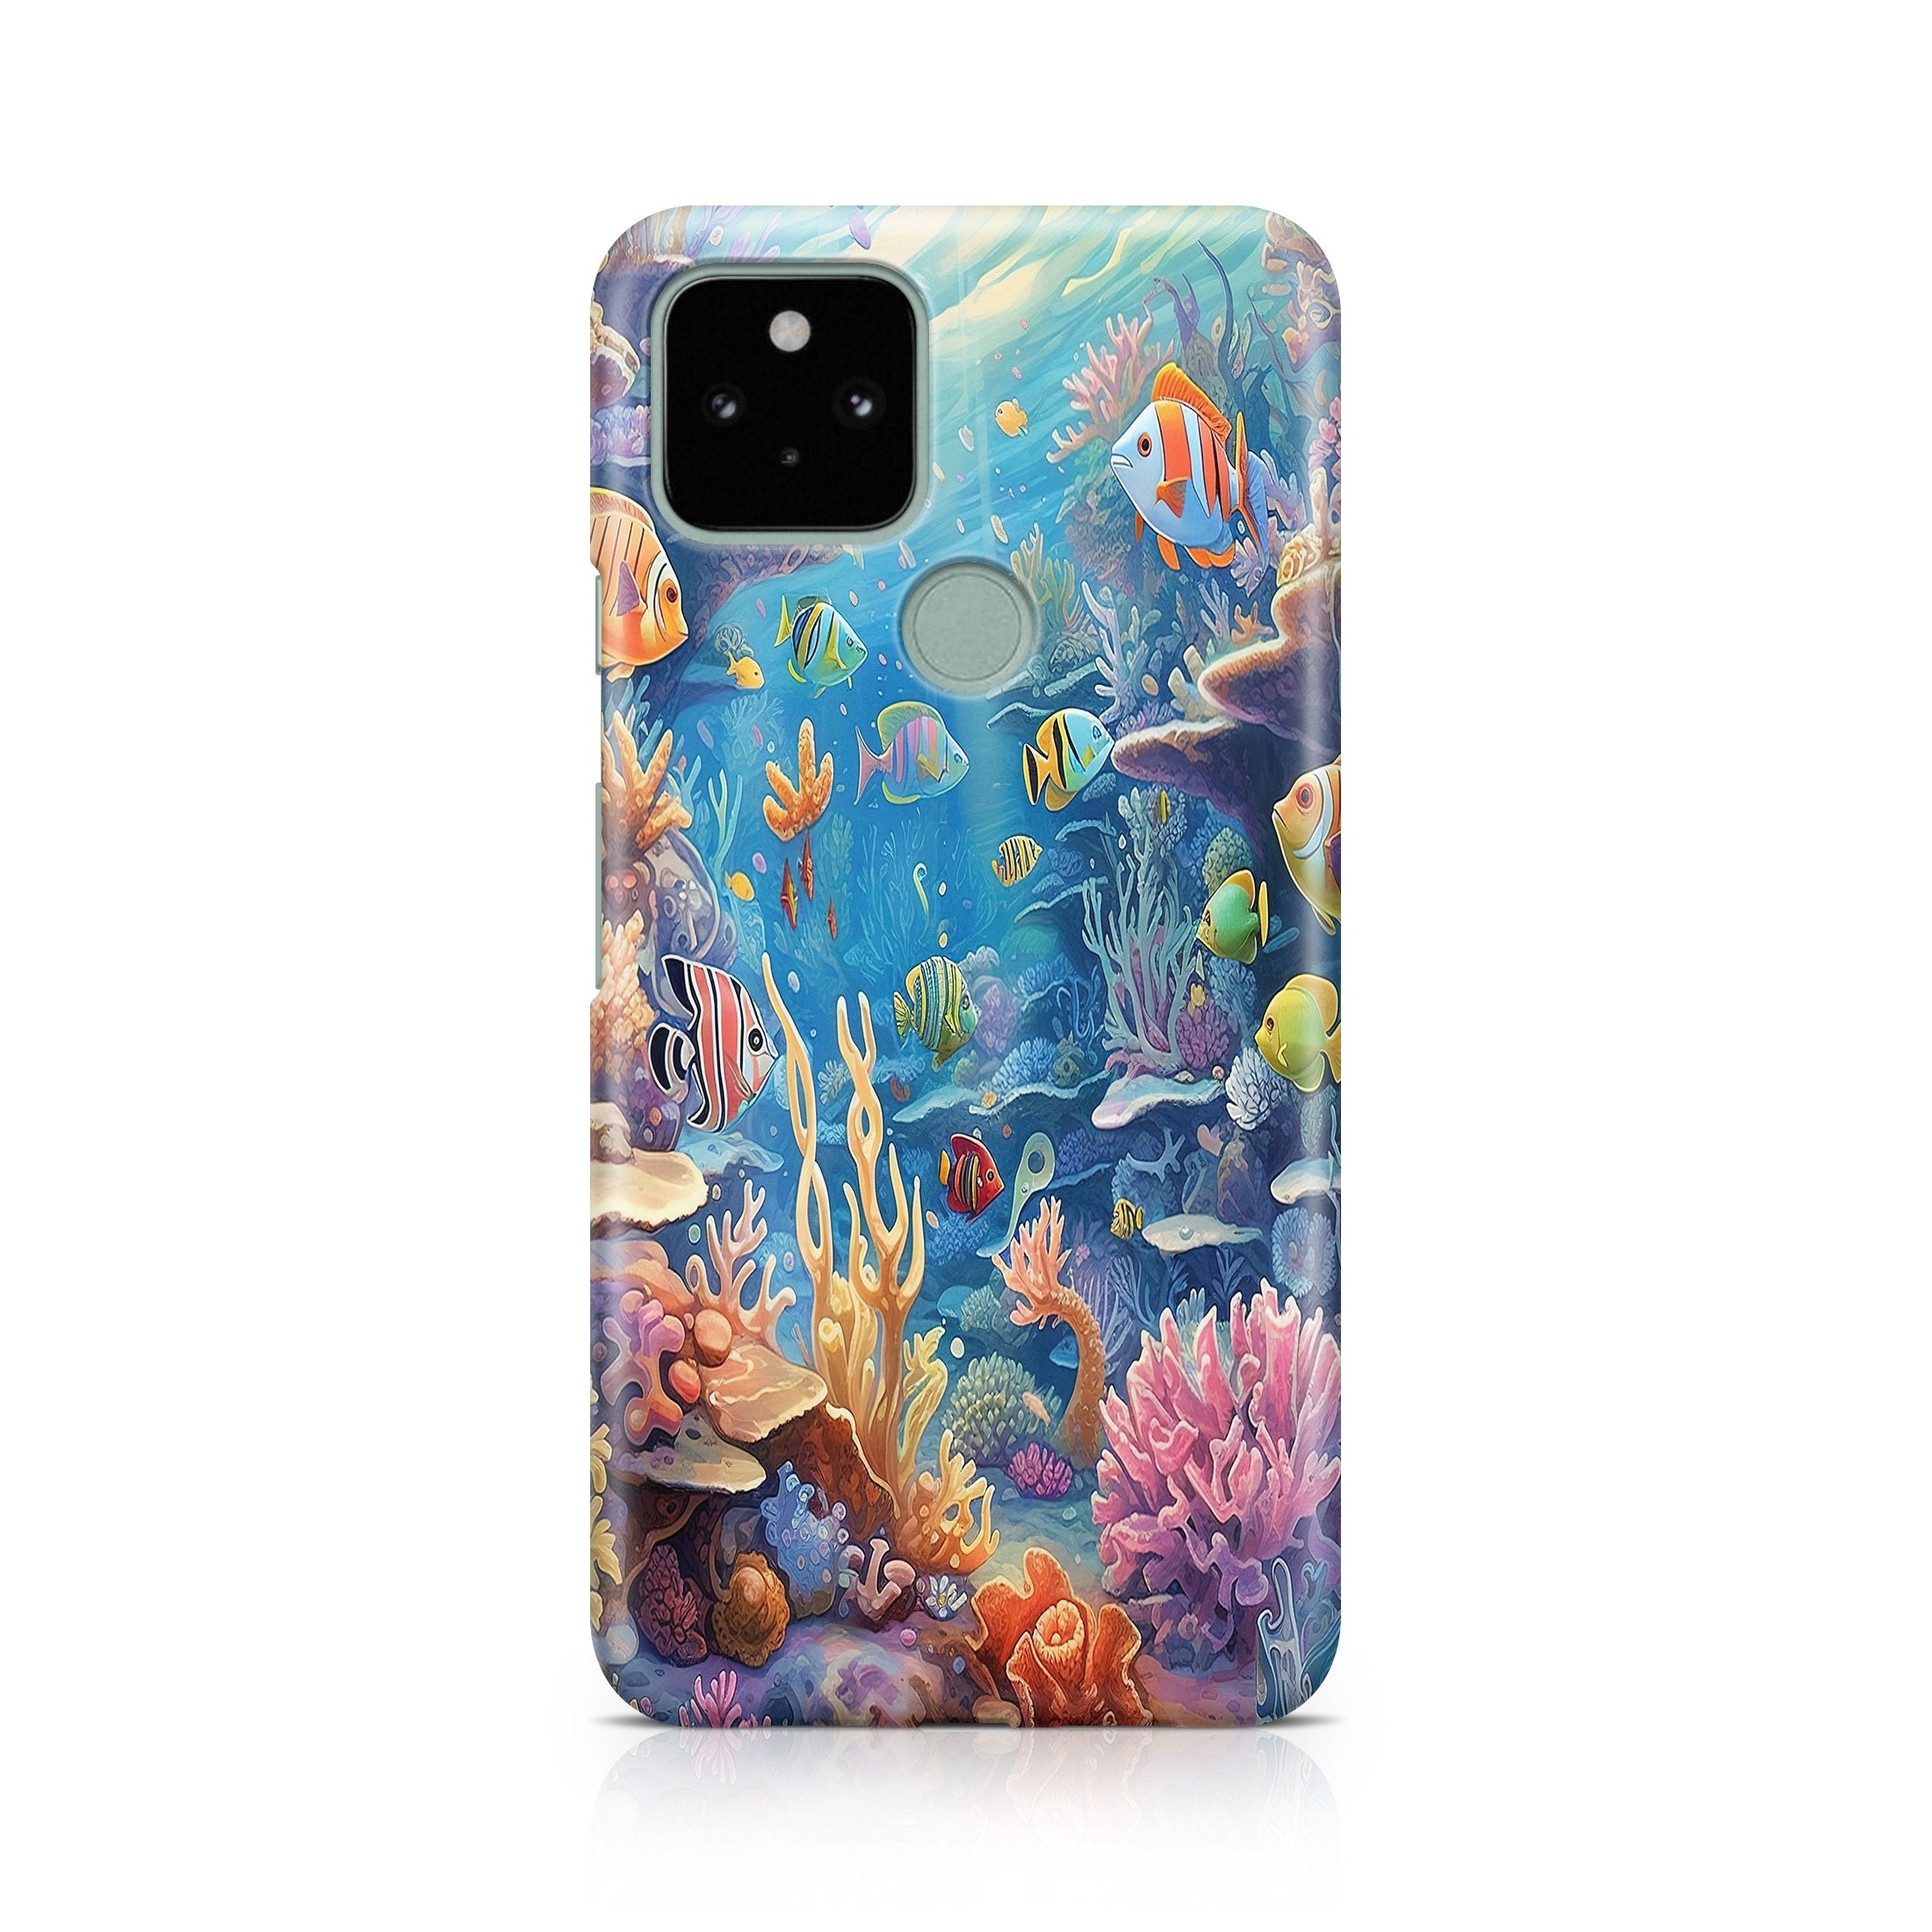 Tropical Eden - Google phone case designs by CaseSwagger